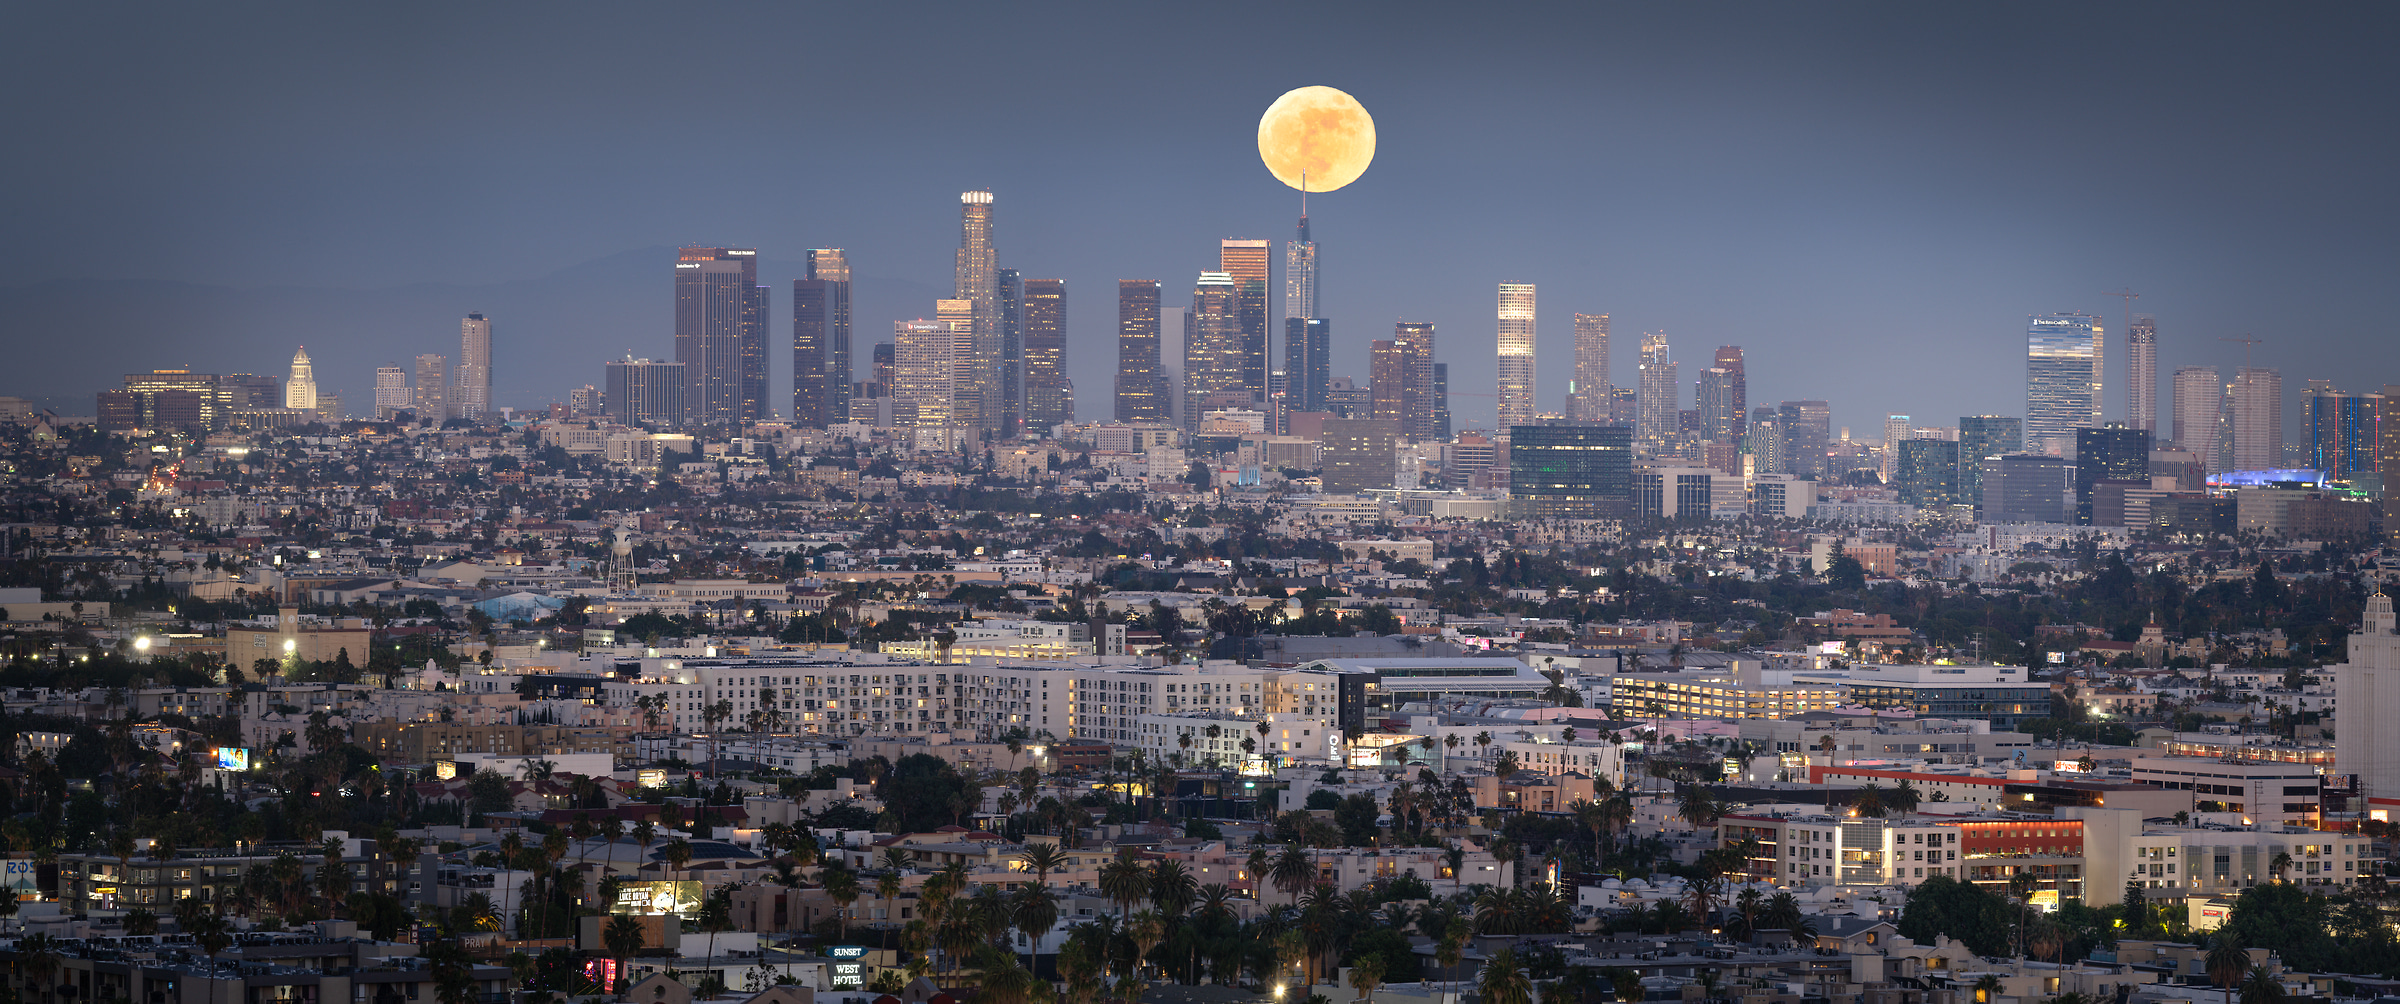 259 megapixels! A very high resolution, large-format VAST photo print of the Los Angeles skyline; cityscape photograph created by Jeff Lewis in Los Angeles, California.